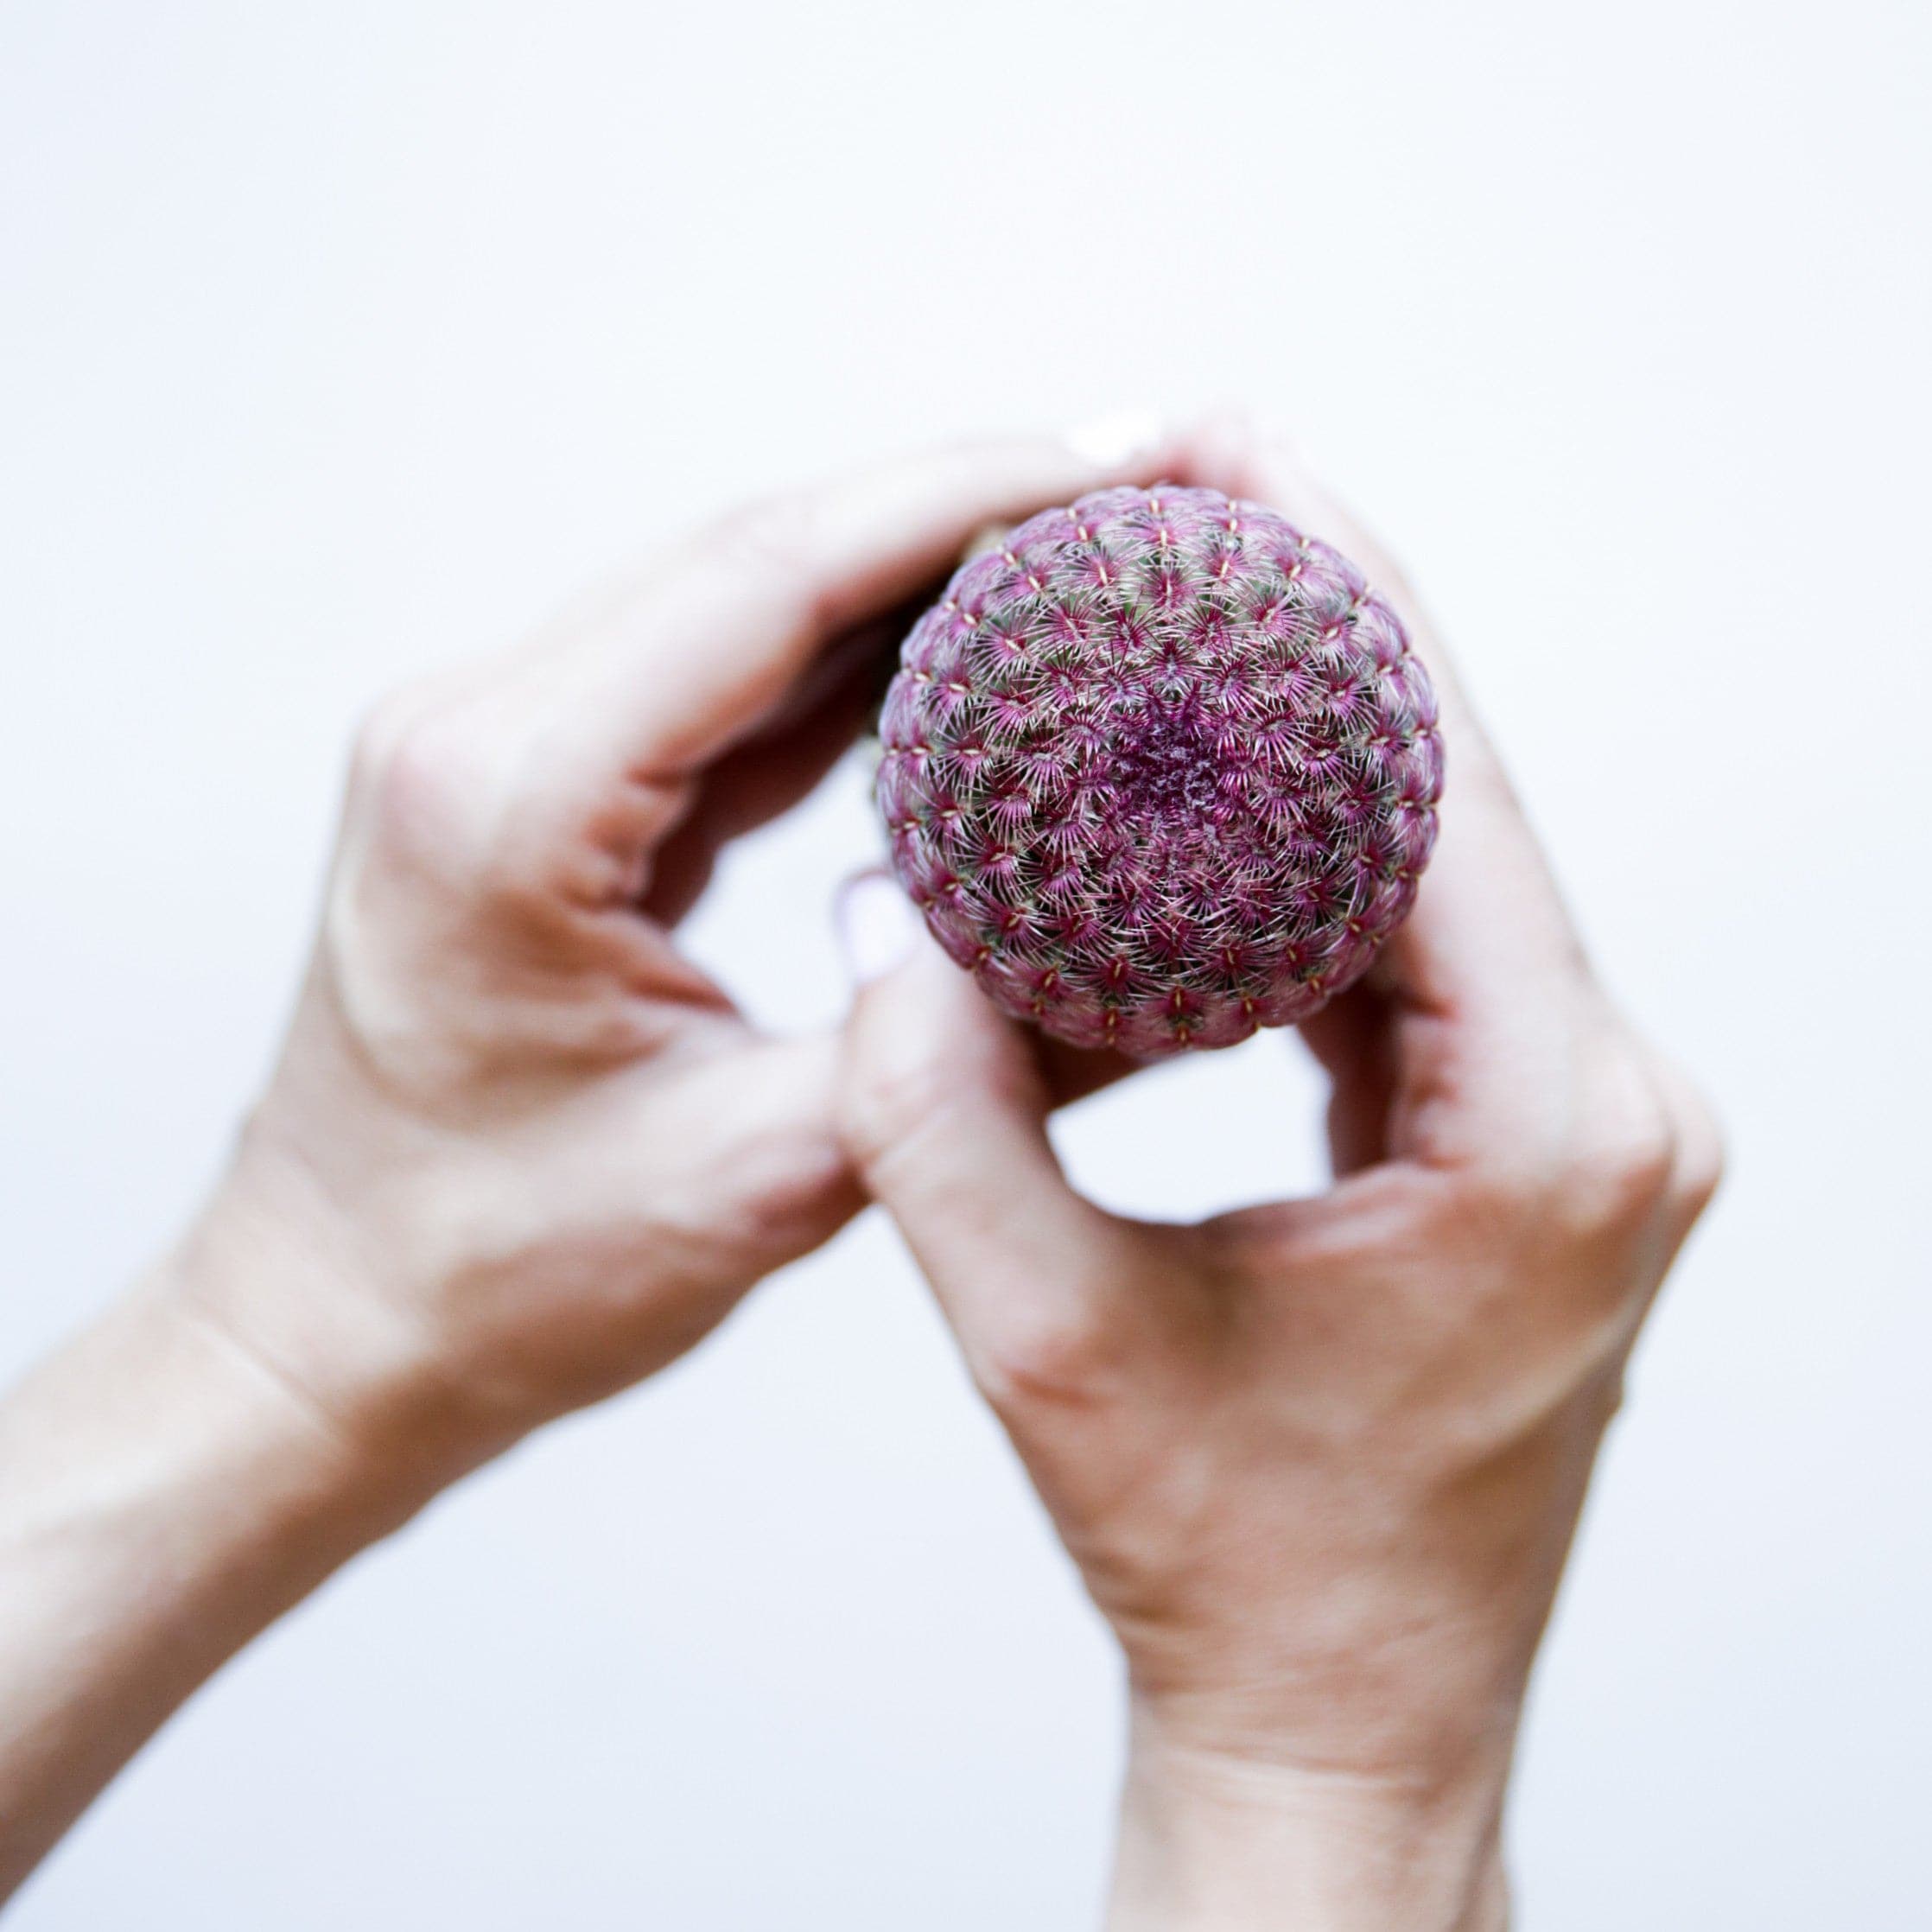 In front of a white background is the birds eye view of a pair of hands holding a round cactus. The cactus is maroon and green. 